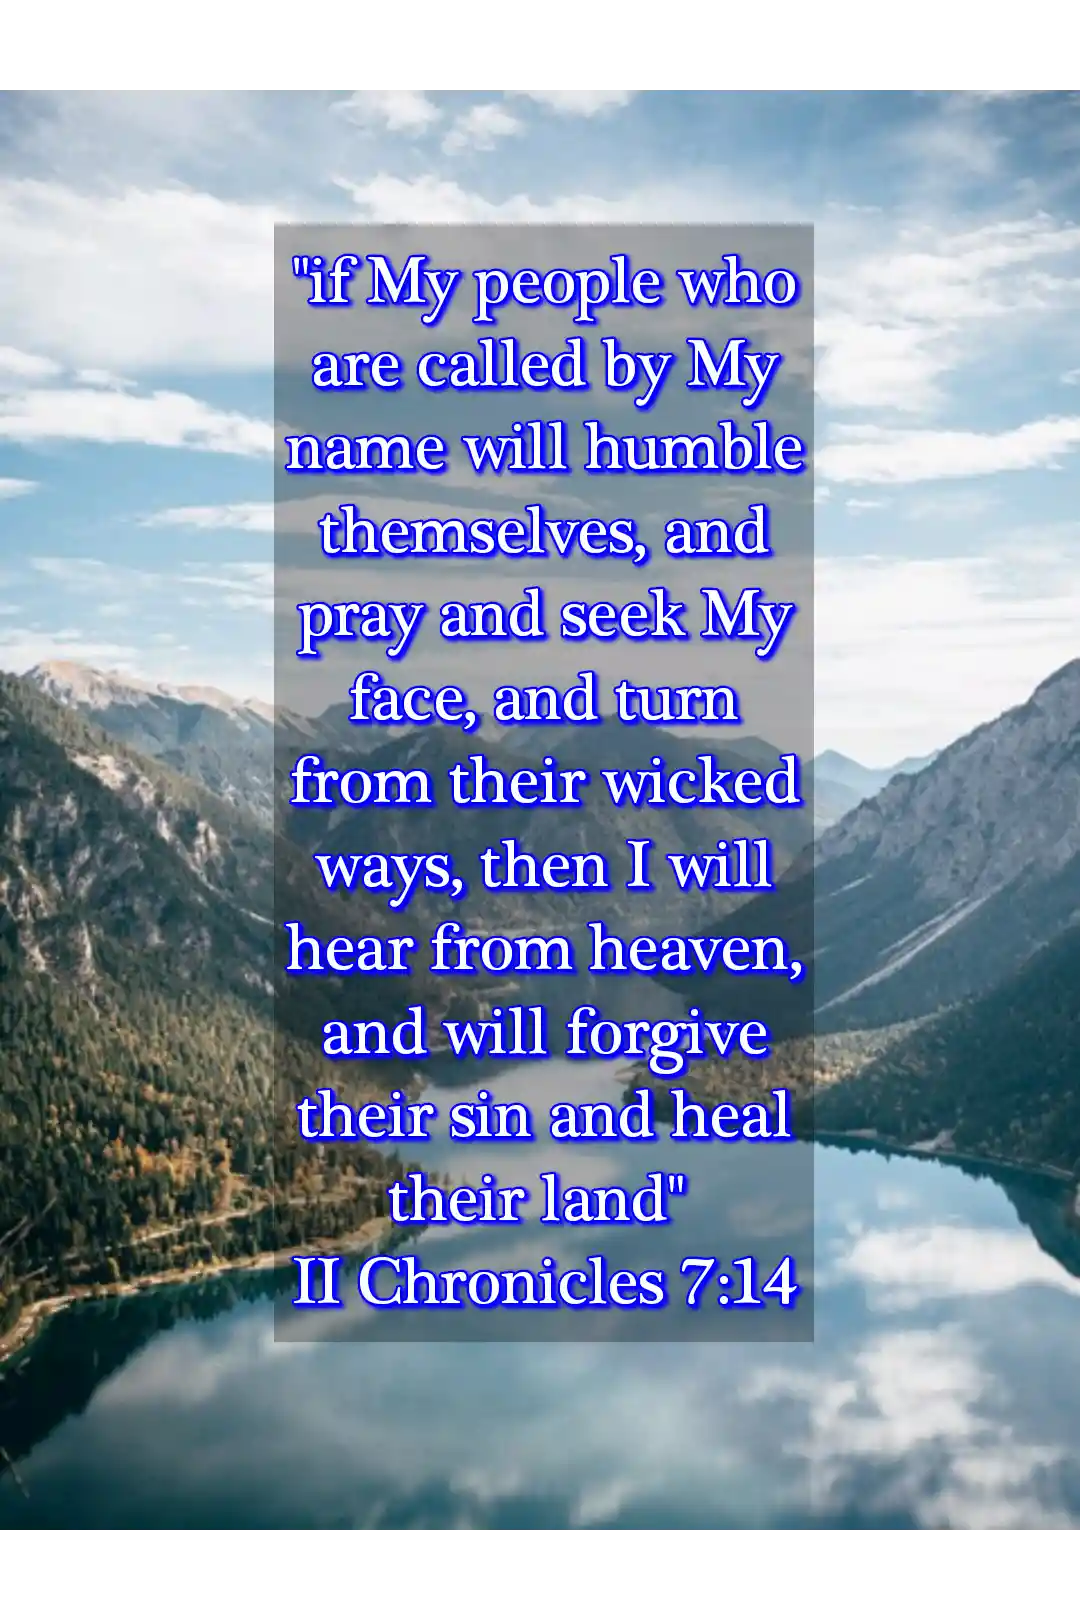 bible verses about humble (2 Chronicles 7:14)